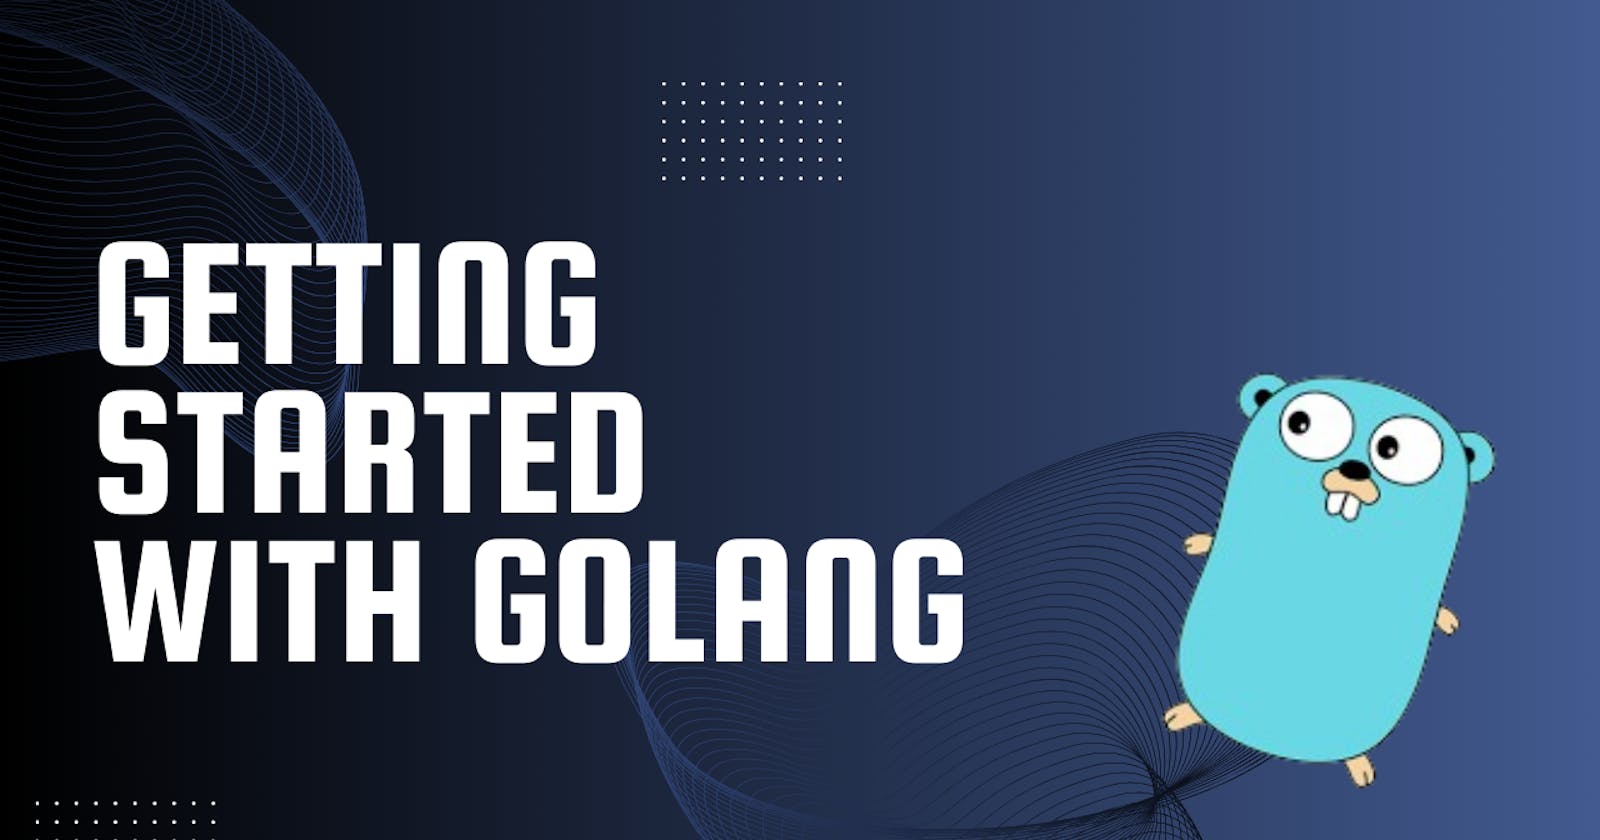 Getting Started With Golang